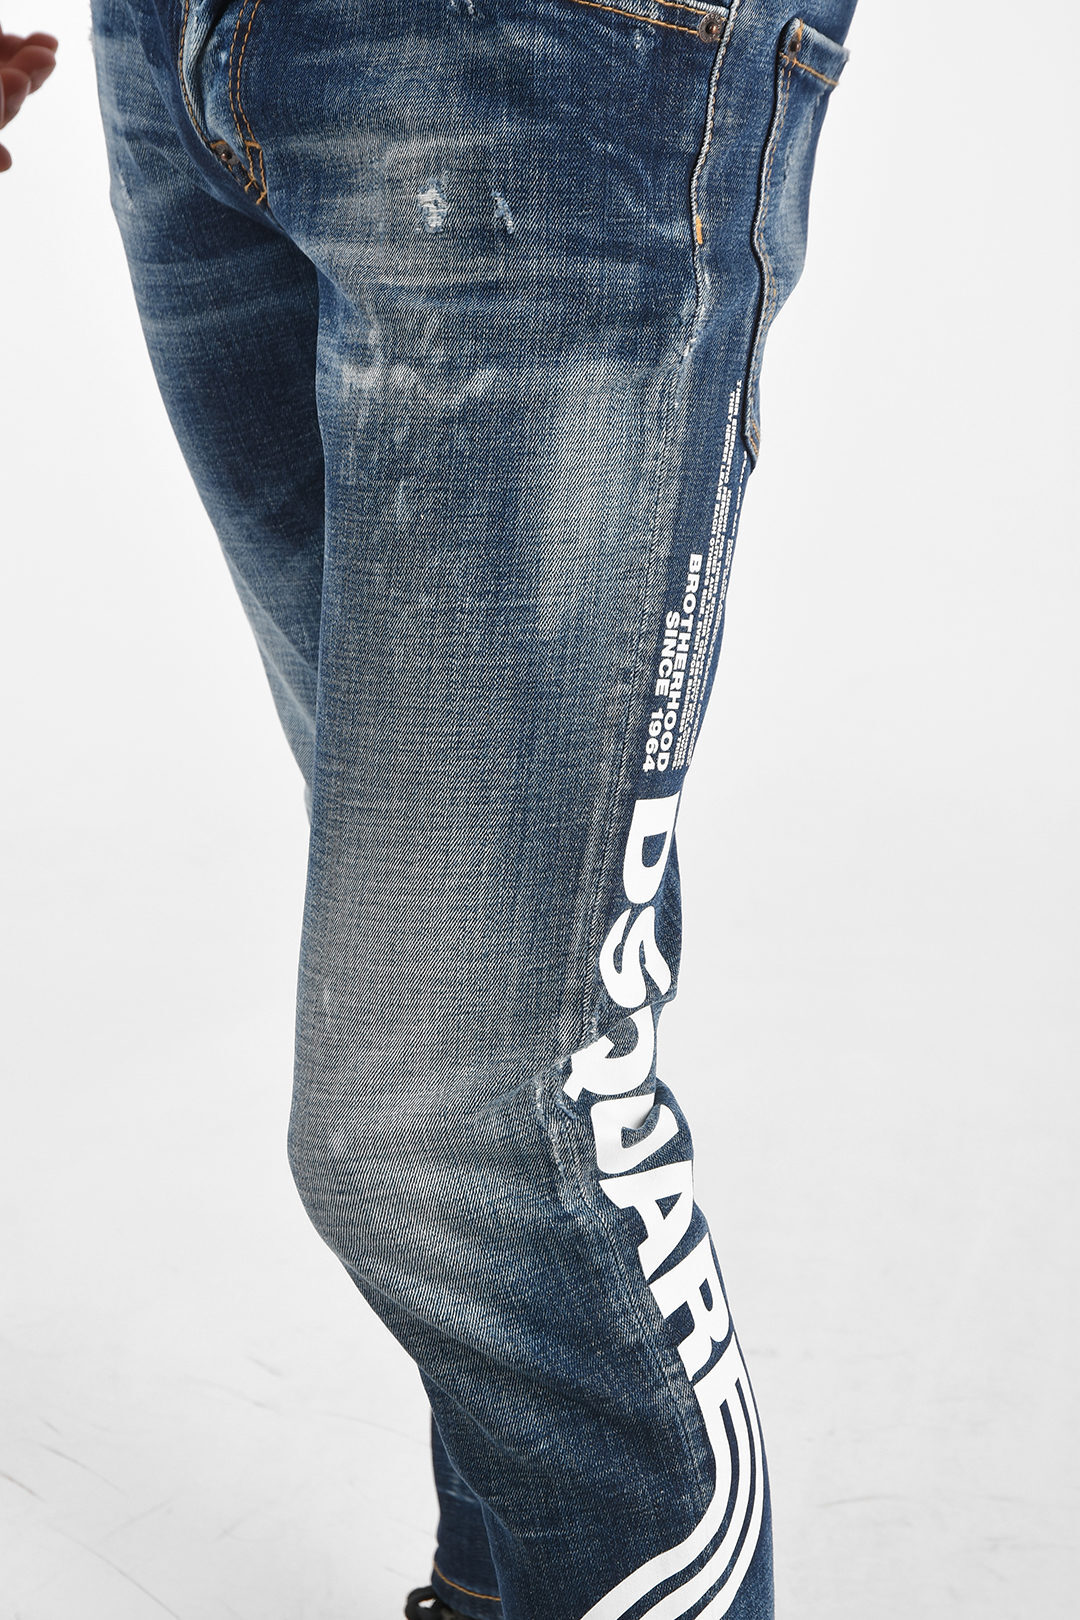 DSQUARED2 ディースクエアード Blue PRINTED SKATER JEANS 15CM メンズ